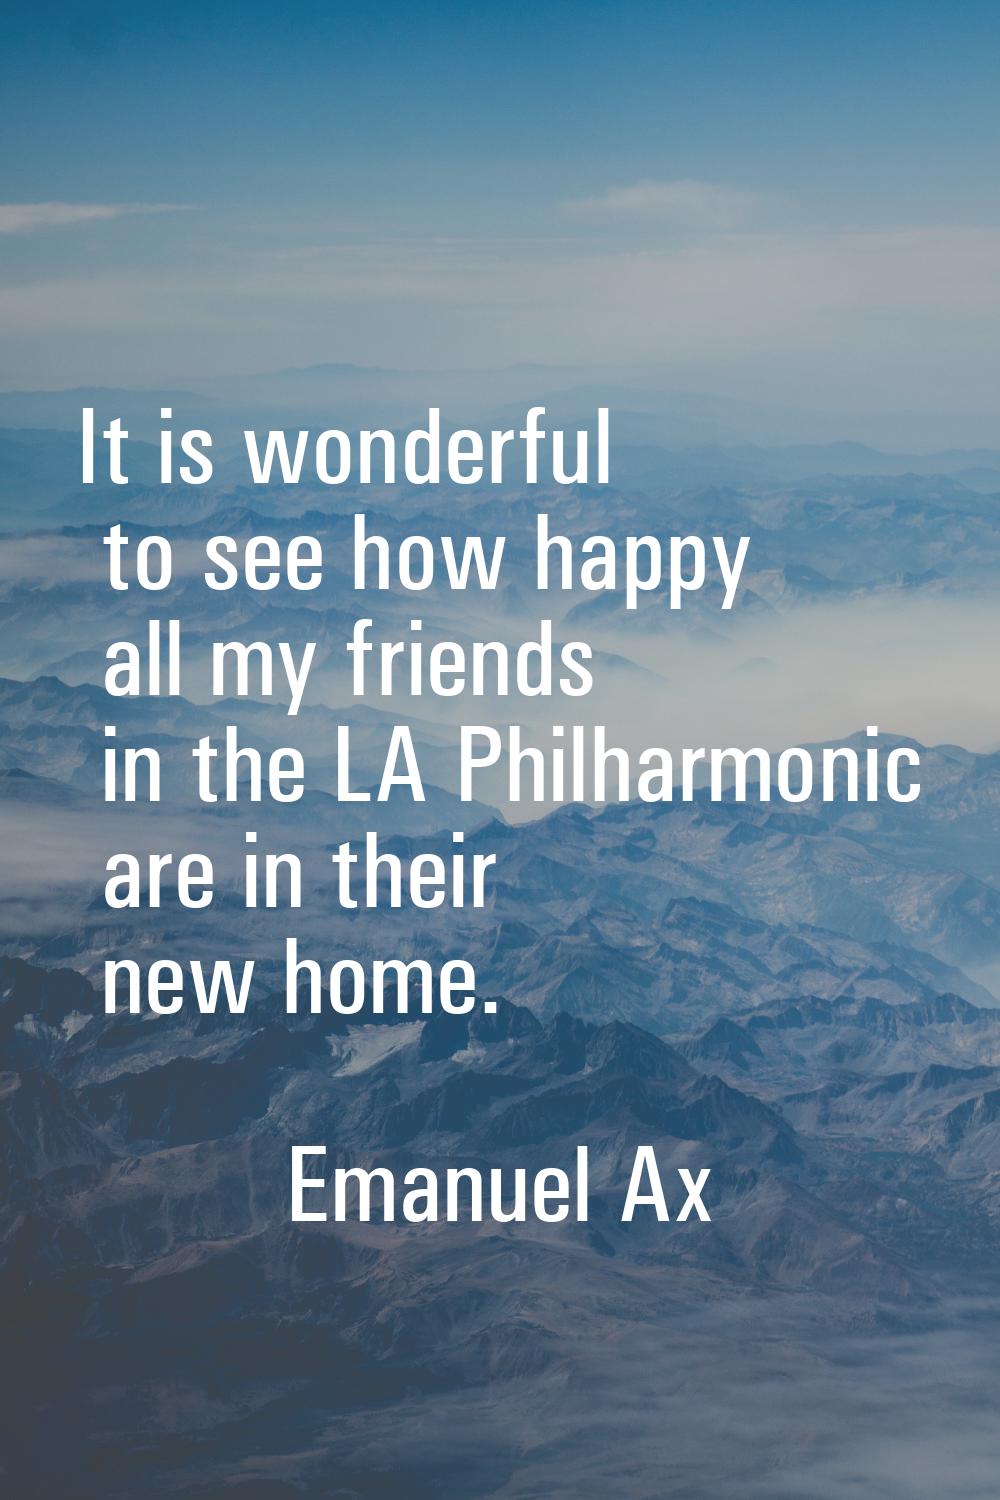 It is wonderful to see how happy all my friends in the LA Philharmonic are in their new home.